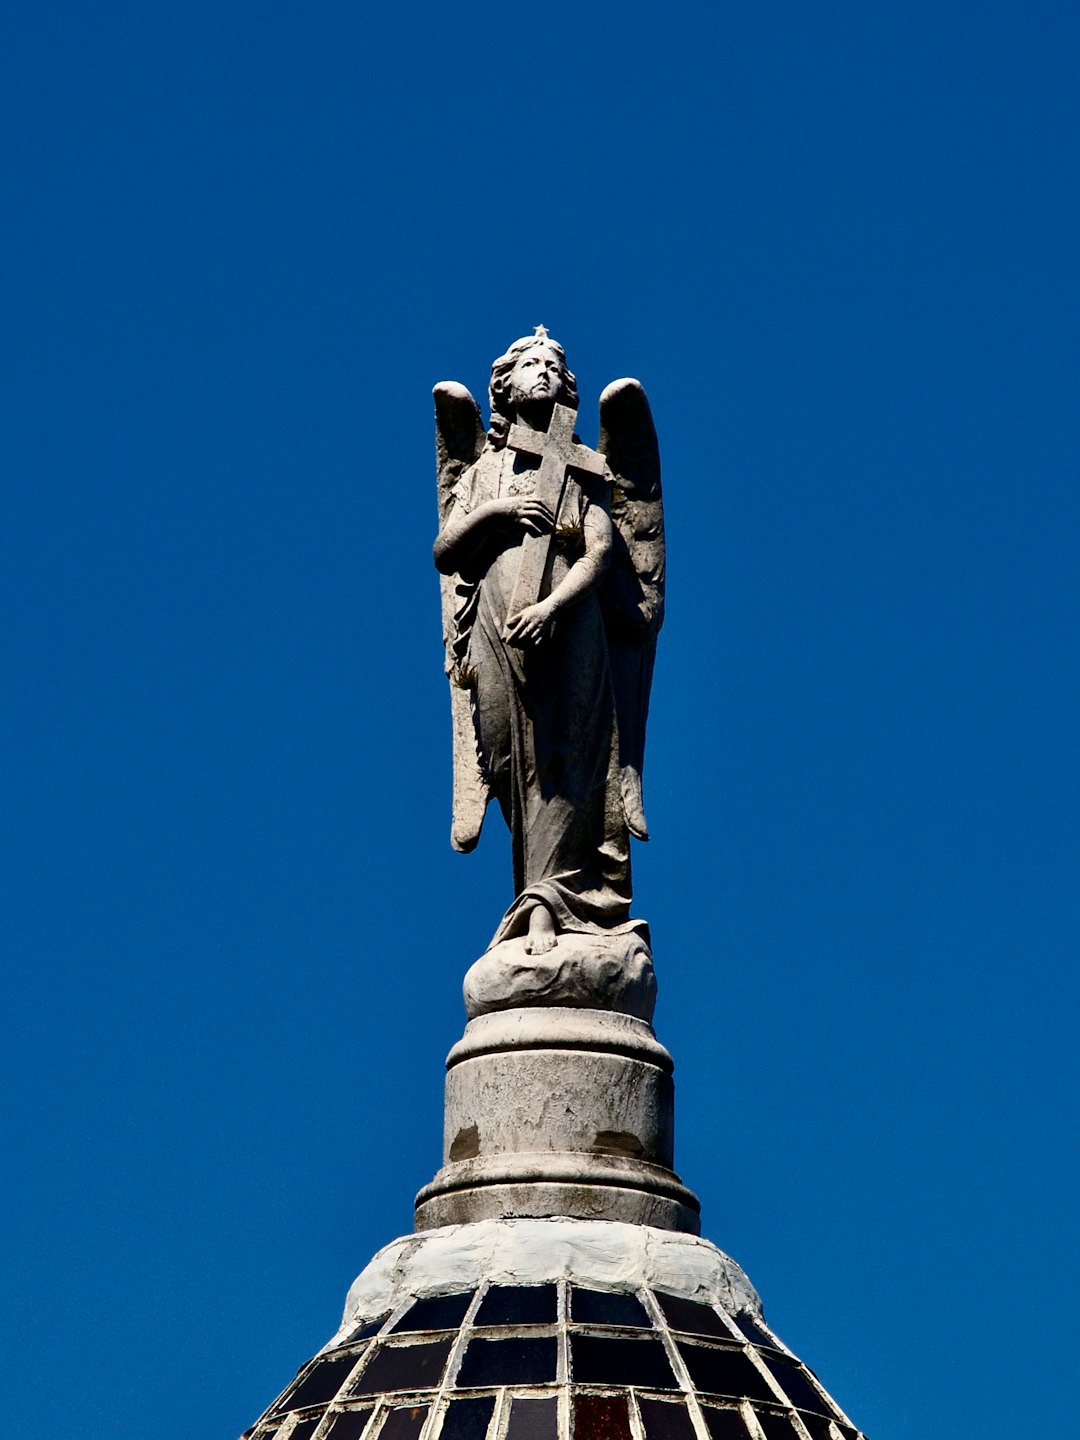 man holding book statue under blue sky during daytime